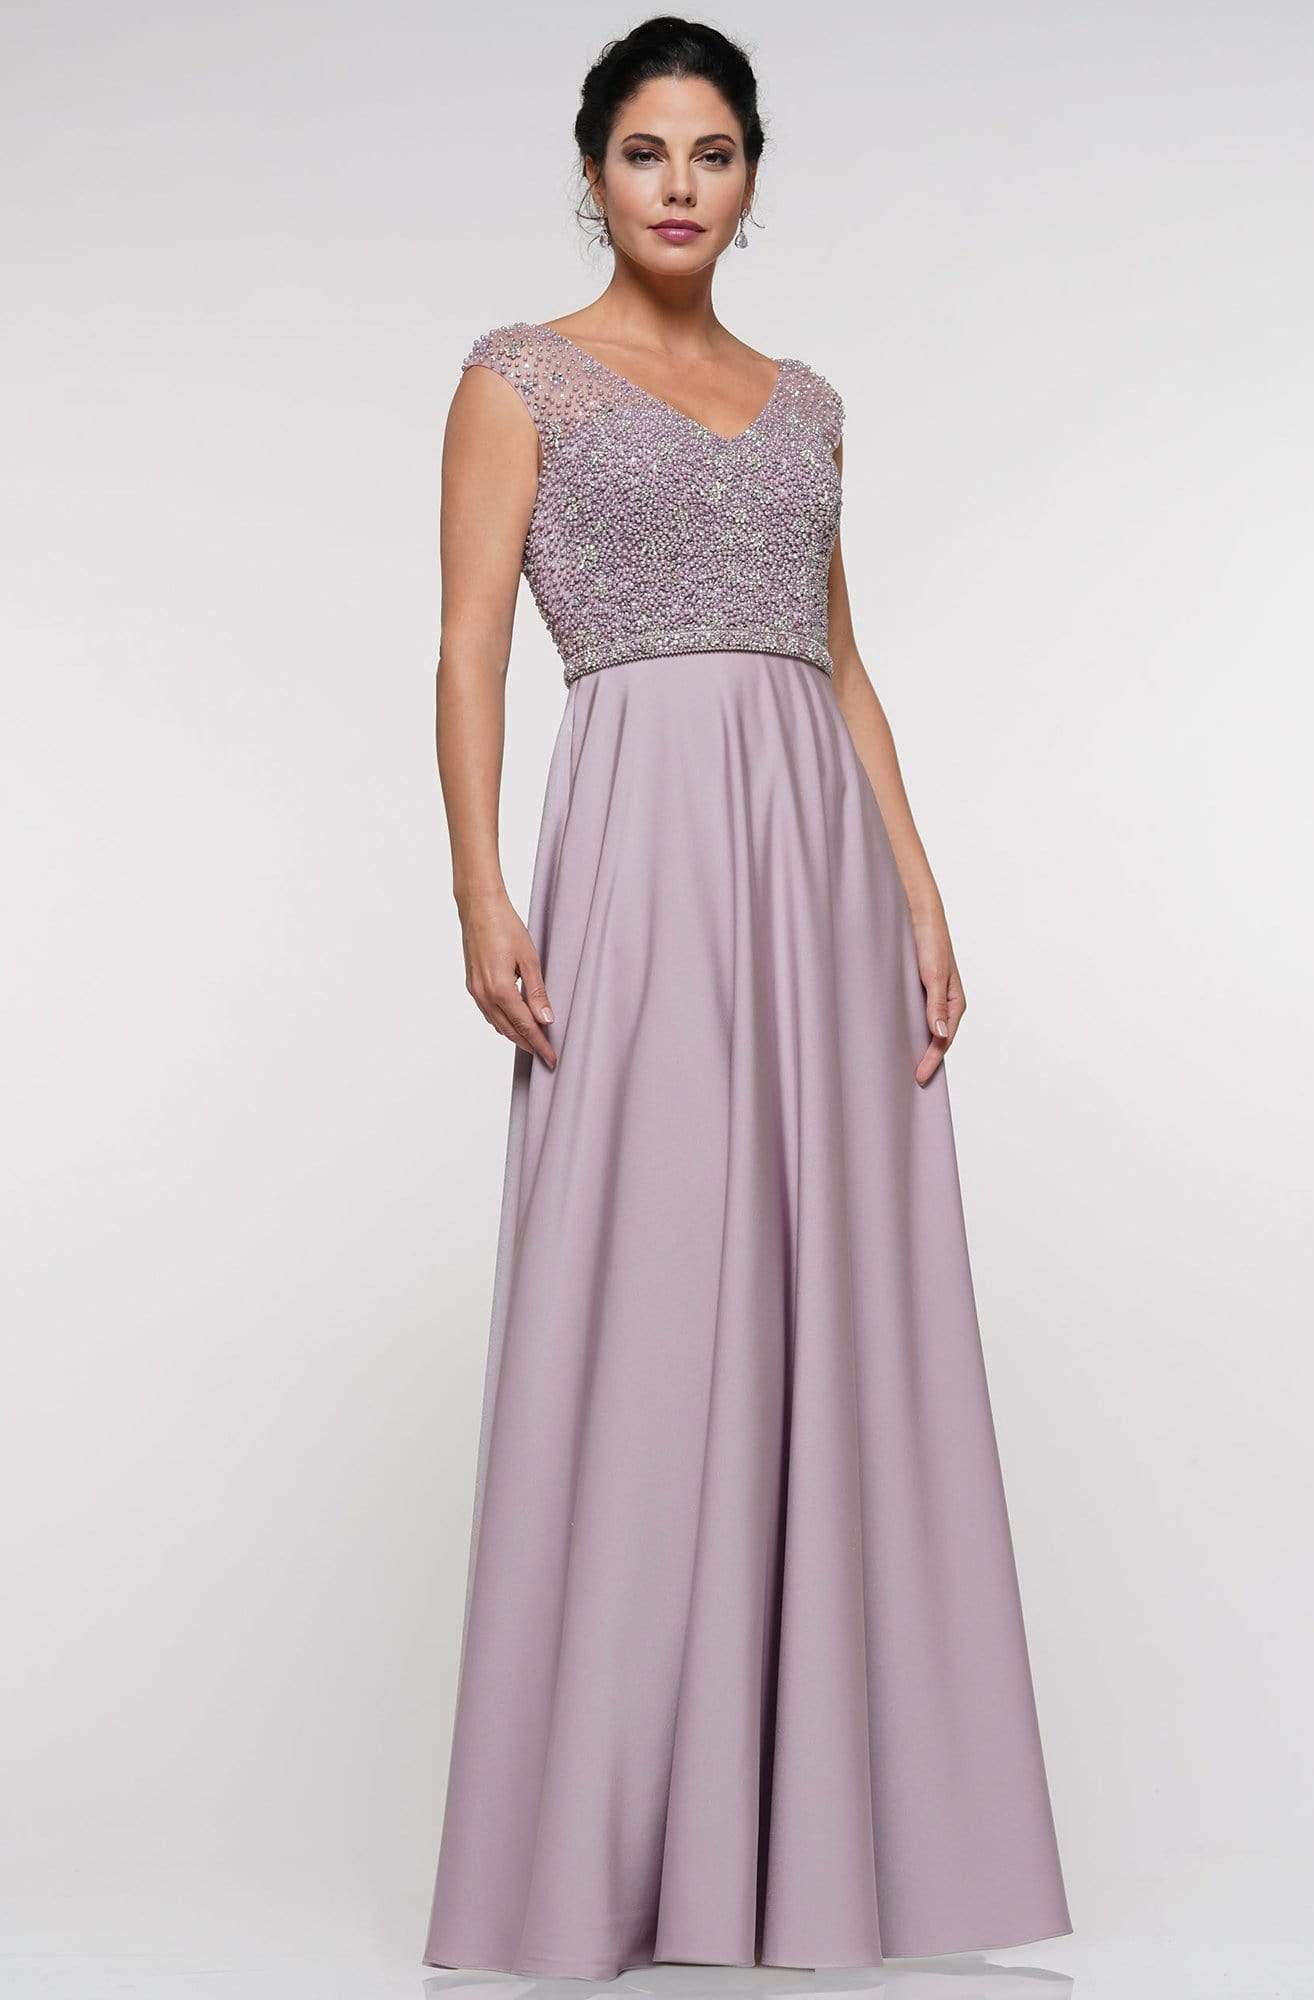 Marsoni By Colors - MV1002 Fully Beaded Top Faille A-Line Gown Mother of the Bride Dresses 4 / Dusty Rose